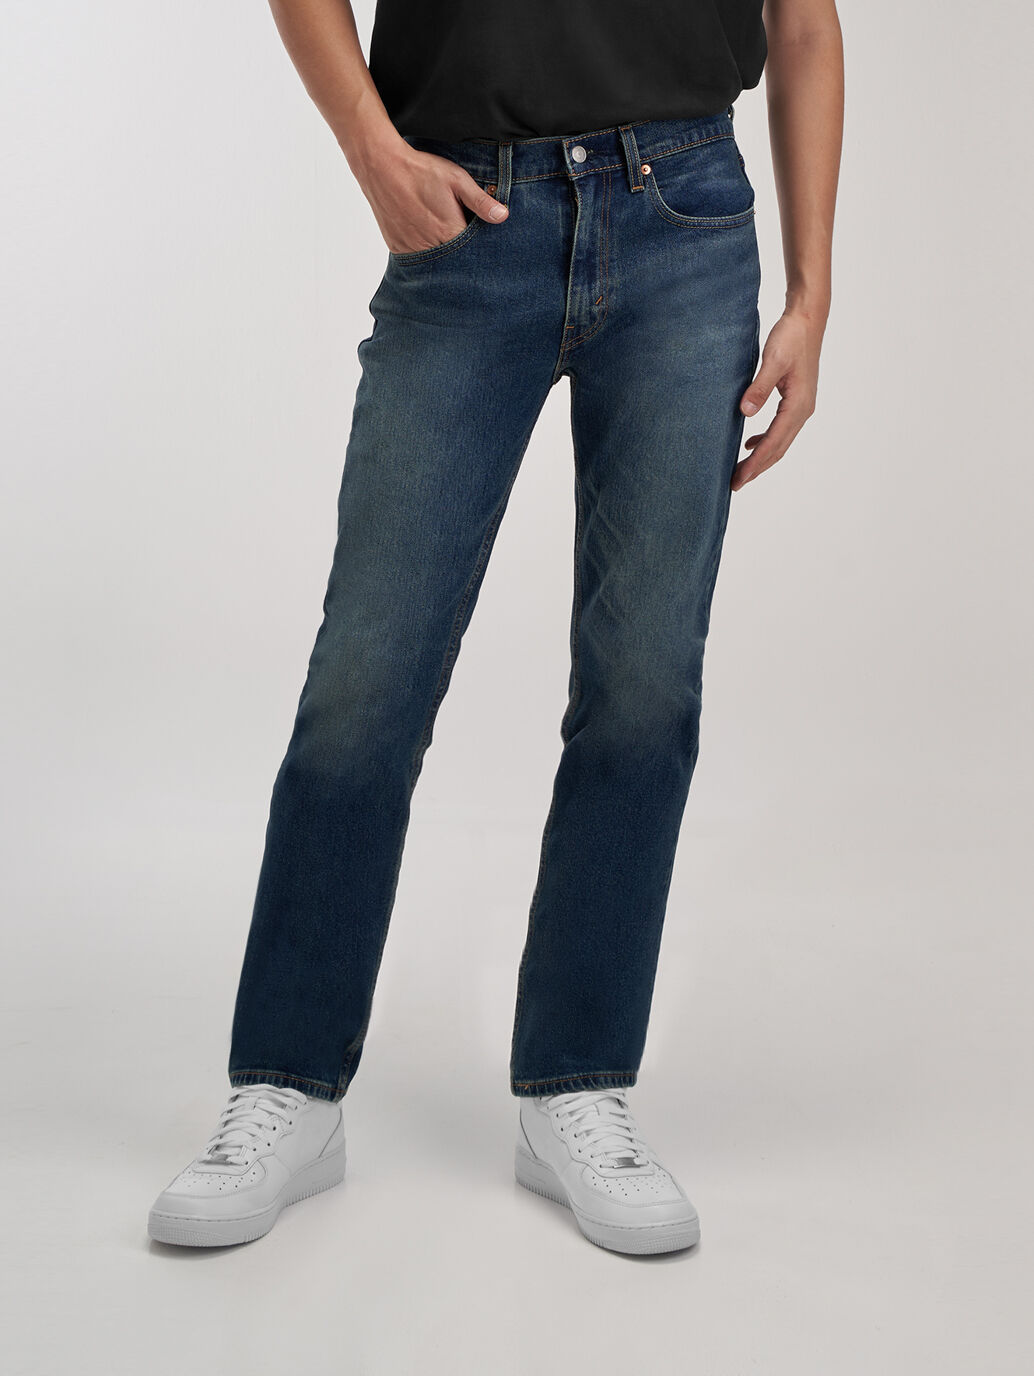 levis 516 replacement